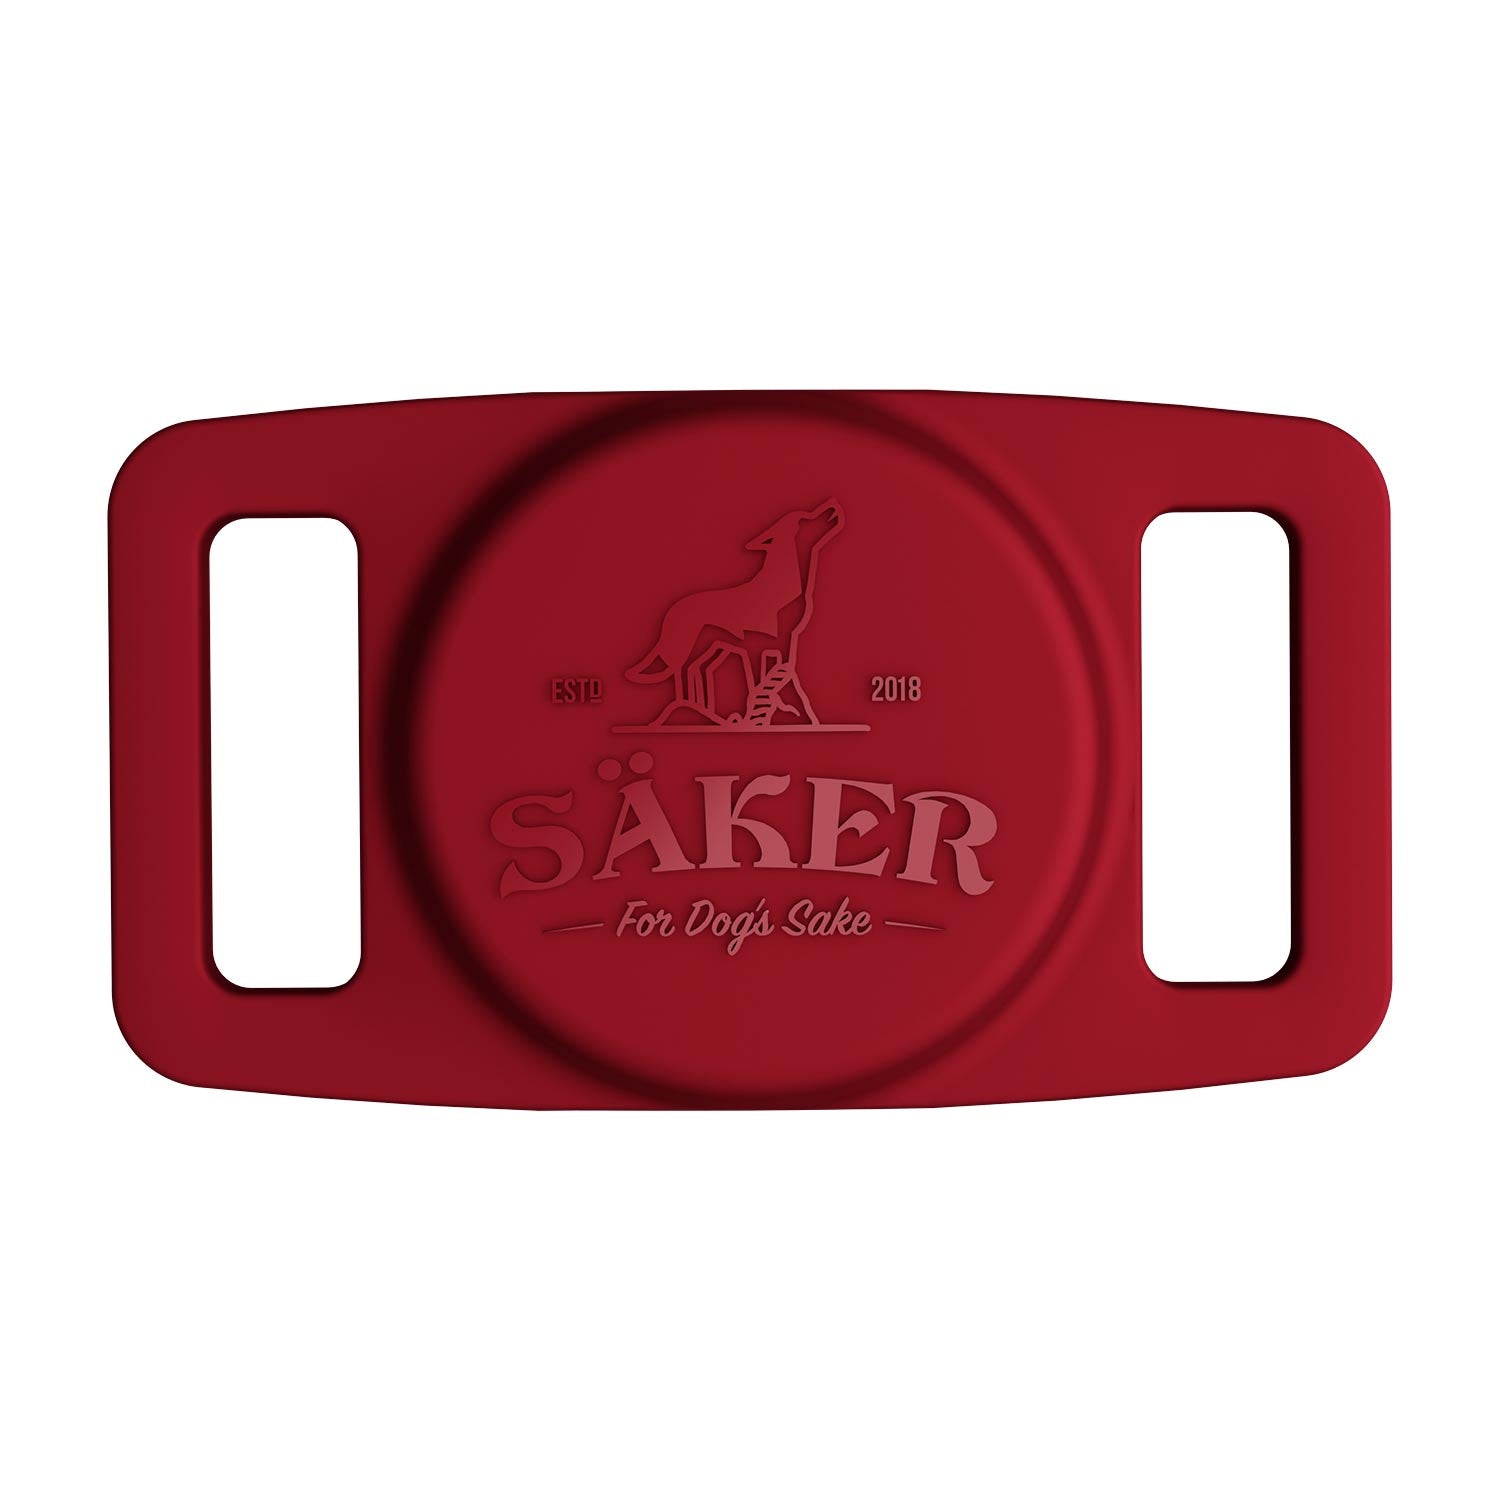 Main image of the Mammoth Airtag Holder in Blazing Red